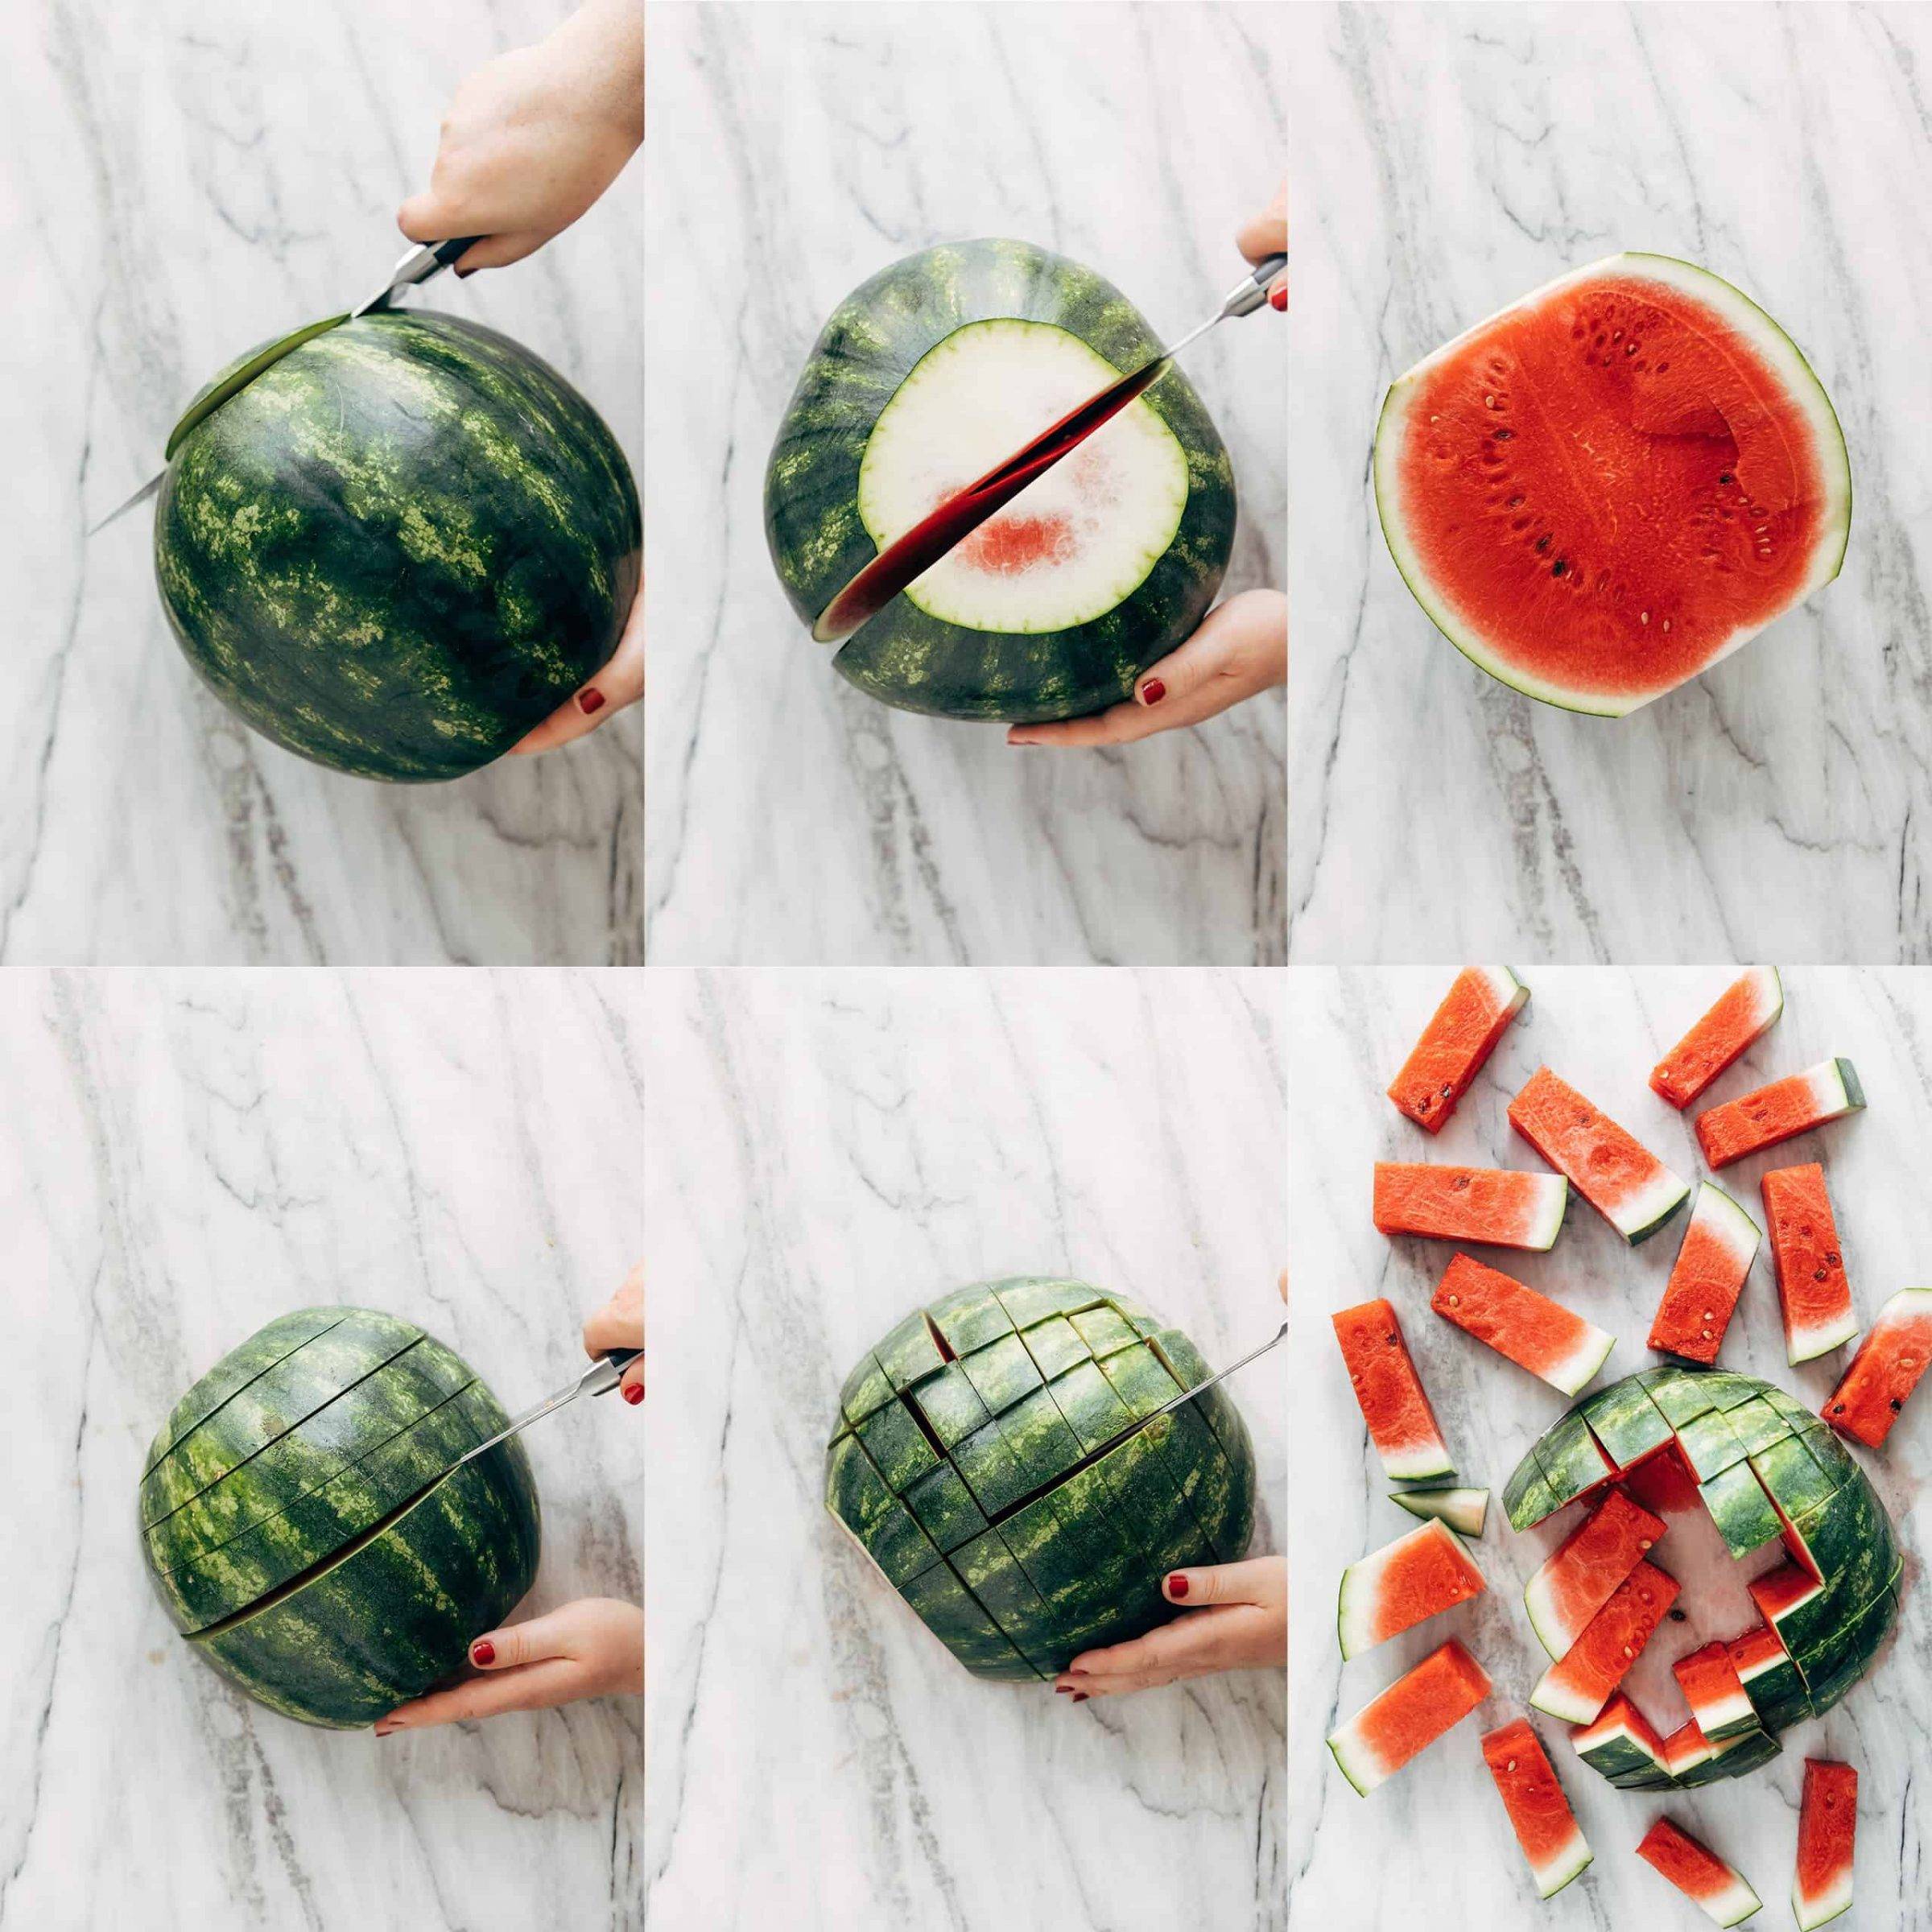 Collage showing how to cut a watermelon into sticks. 